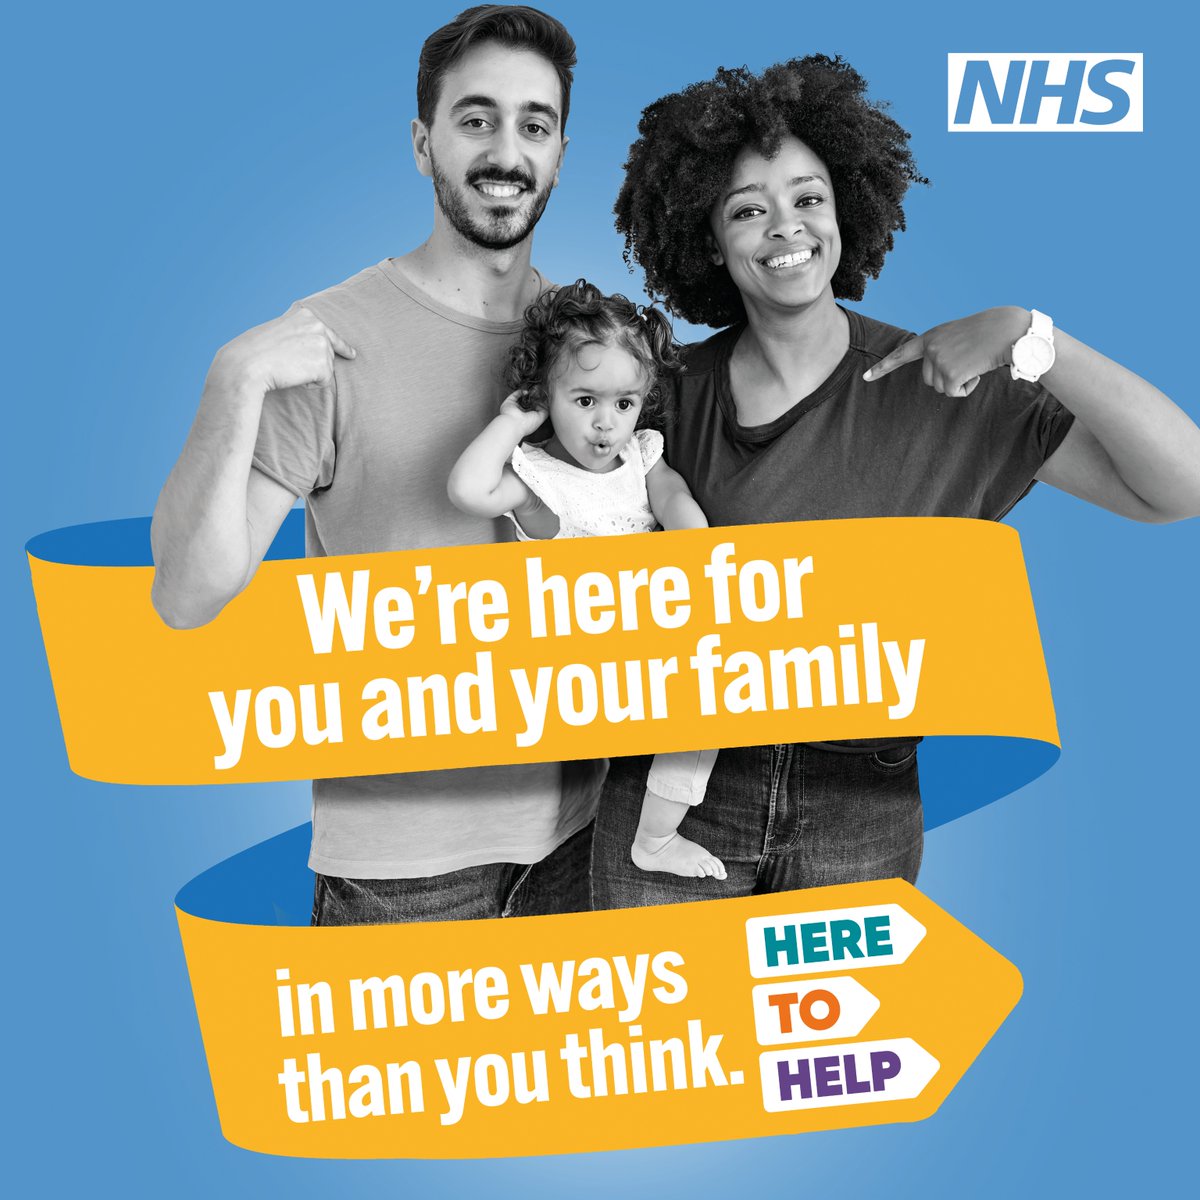 👩‍⚕️Your GP practice is here to help you and your family in more ways than you think: • face to face • on the phone • or online Your practice receptionist can tell you how, and who, would be best for you. 📞 #HeretoHelp